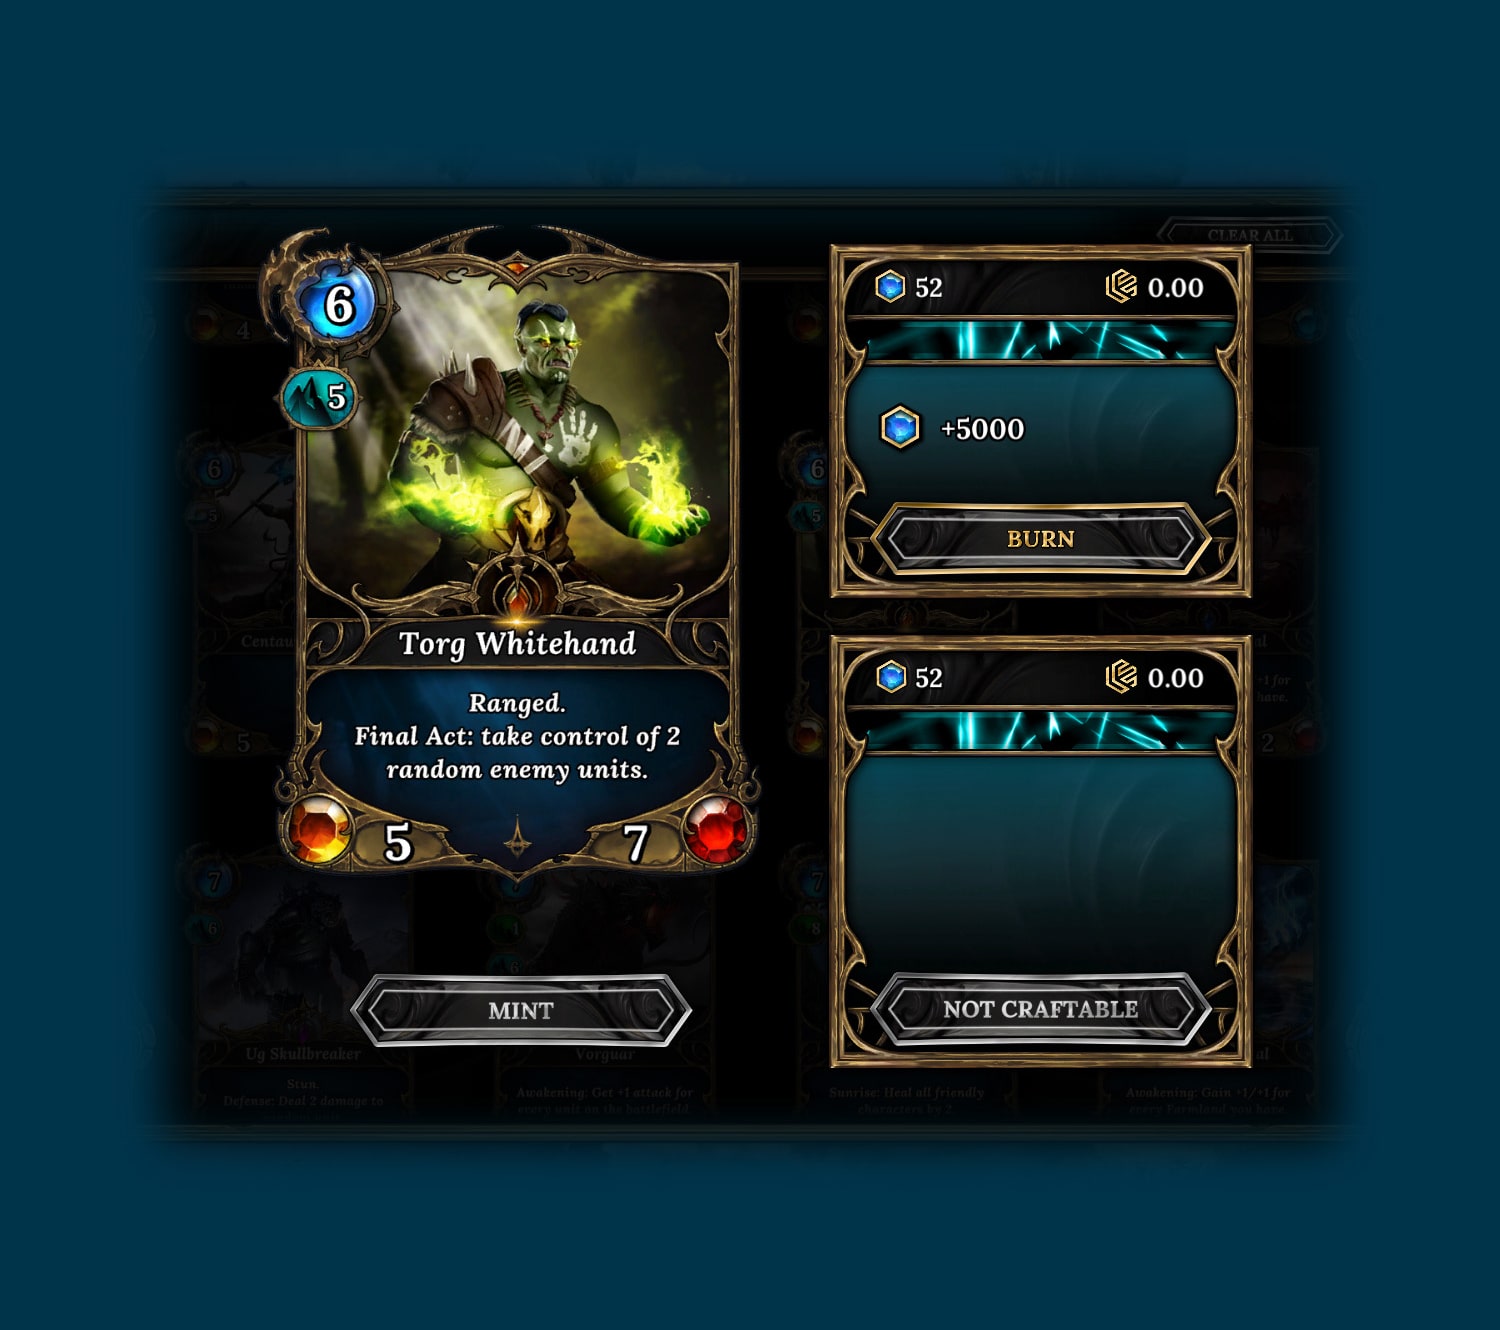 Cards which are not craftable cannot be obtained from card packs, they can only be acquired through limited sales, participation in special events or reaching certain in-game achievements. 